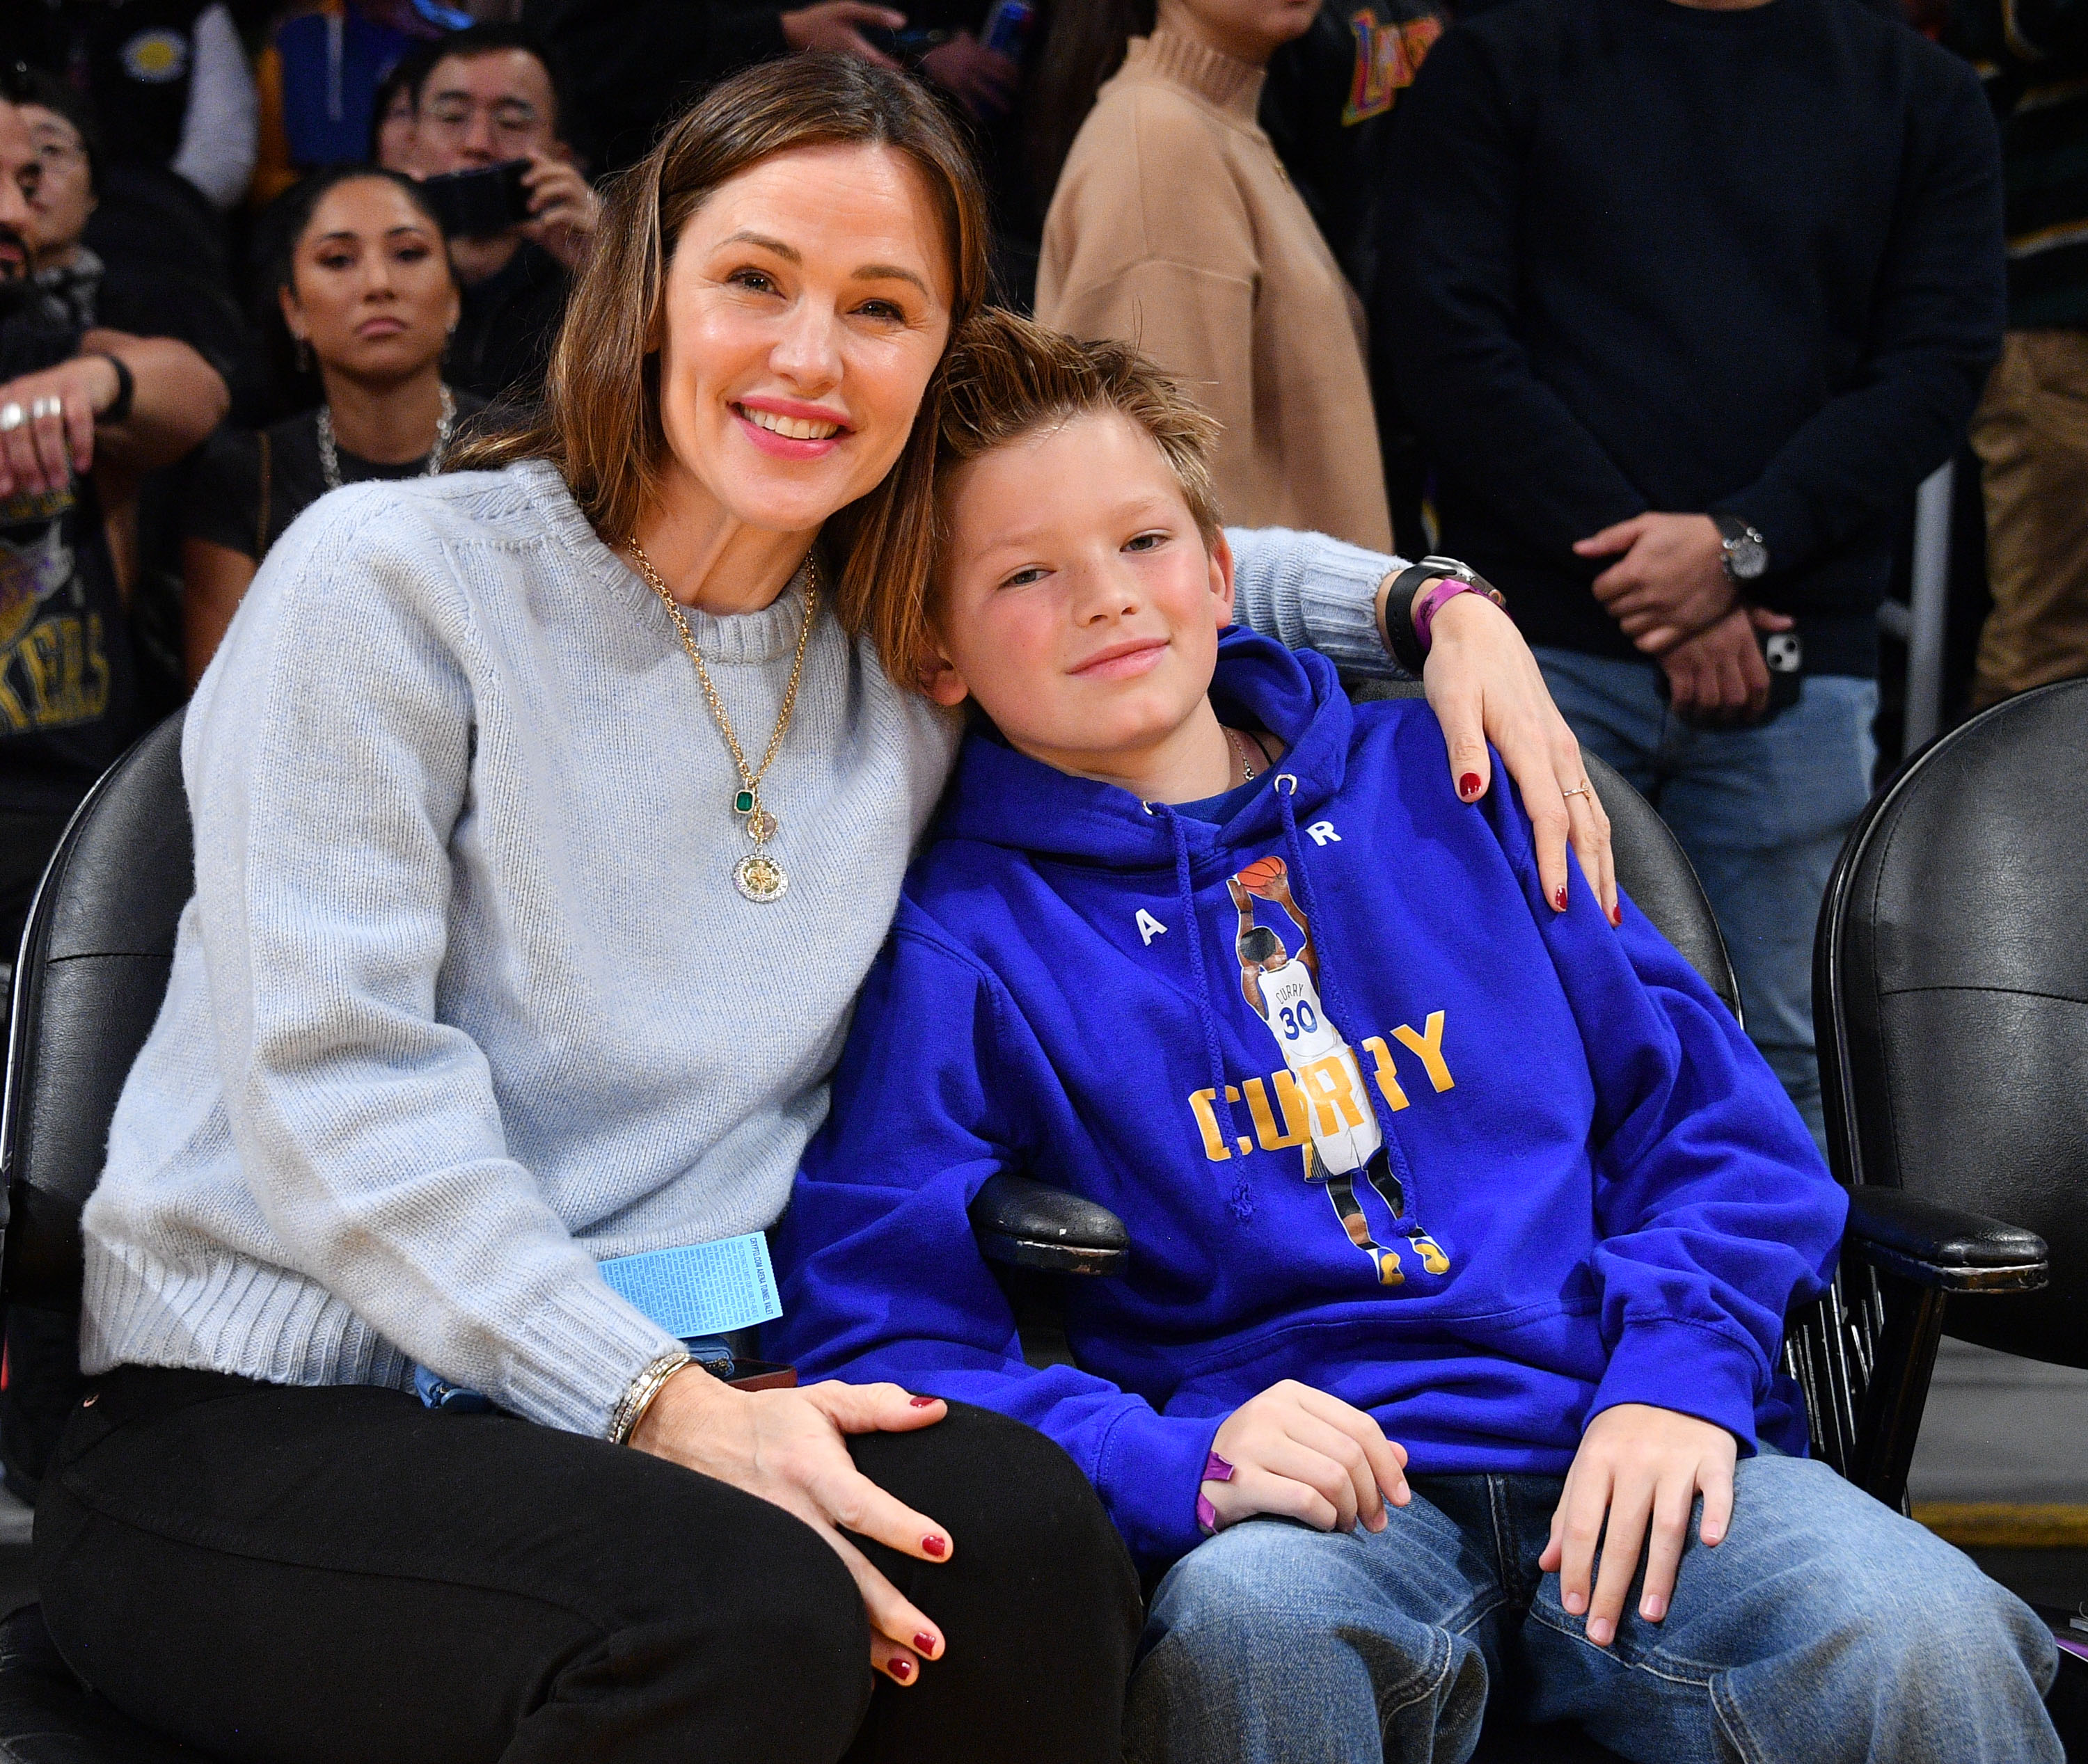 Jennifer Garner and her son Samuel Garner Affleck attend a basketball game between the Los Angeles Lakers and the Golden State Warriors at Crypto.com Arena on March 05, 2023, in Los Angeles, California. | Source: Getty Images